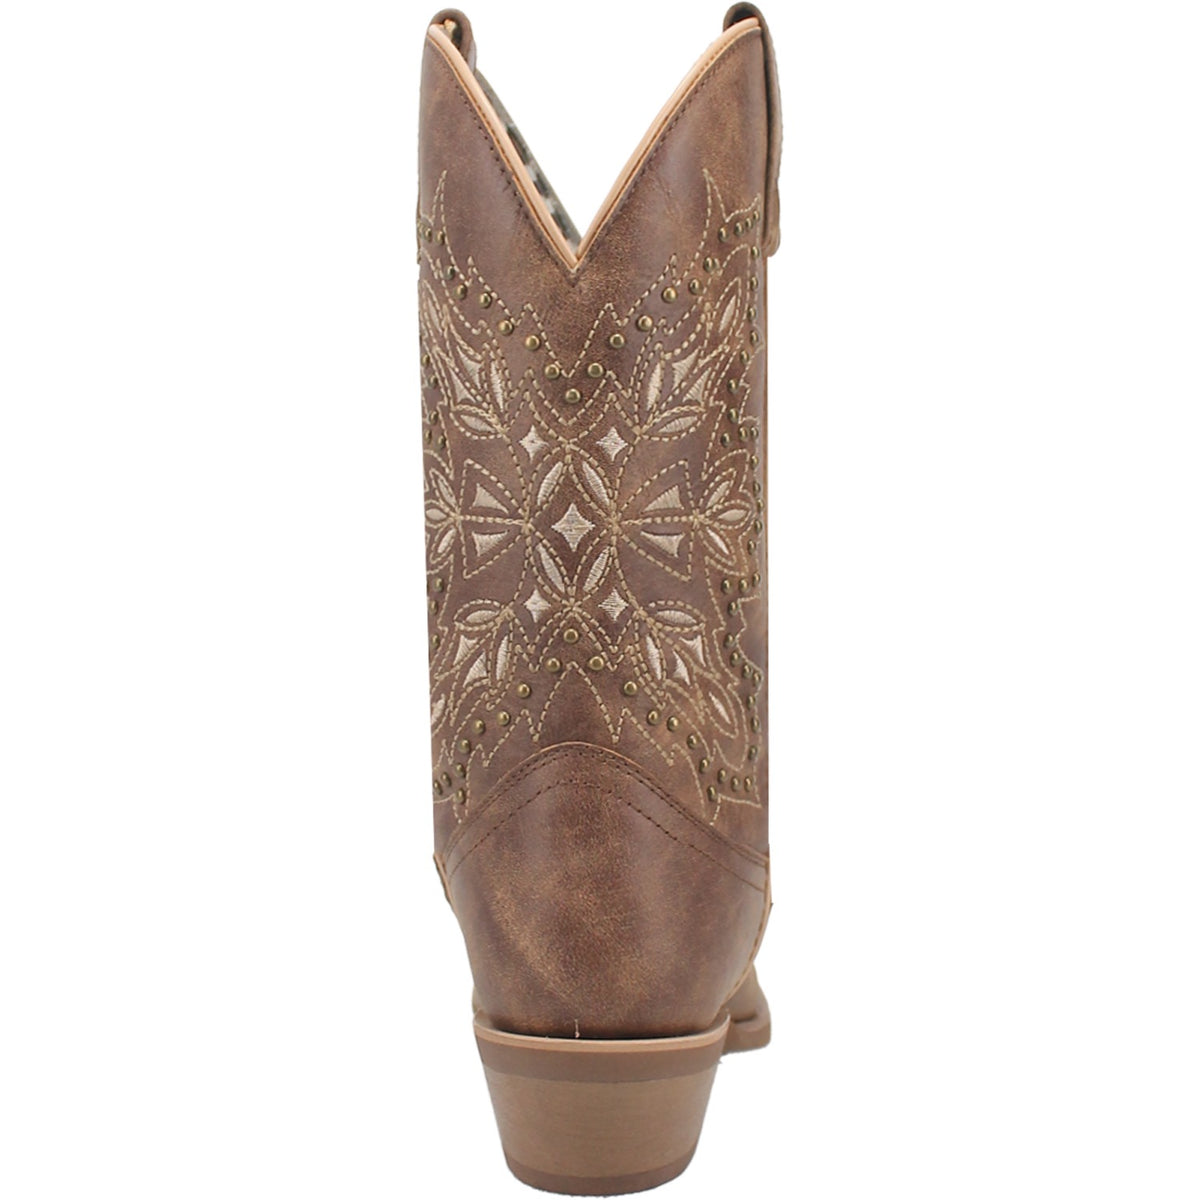 JOURNEE LEATHER BOOT Cover